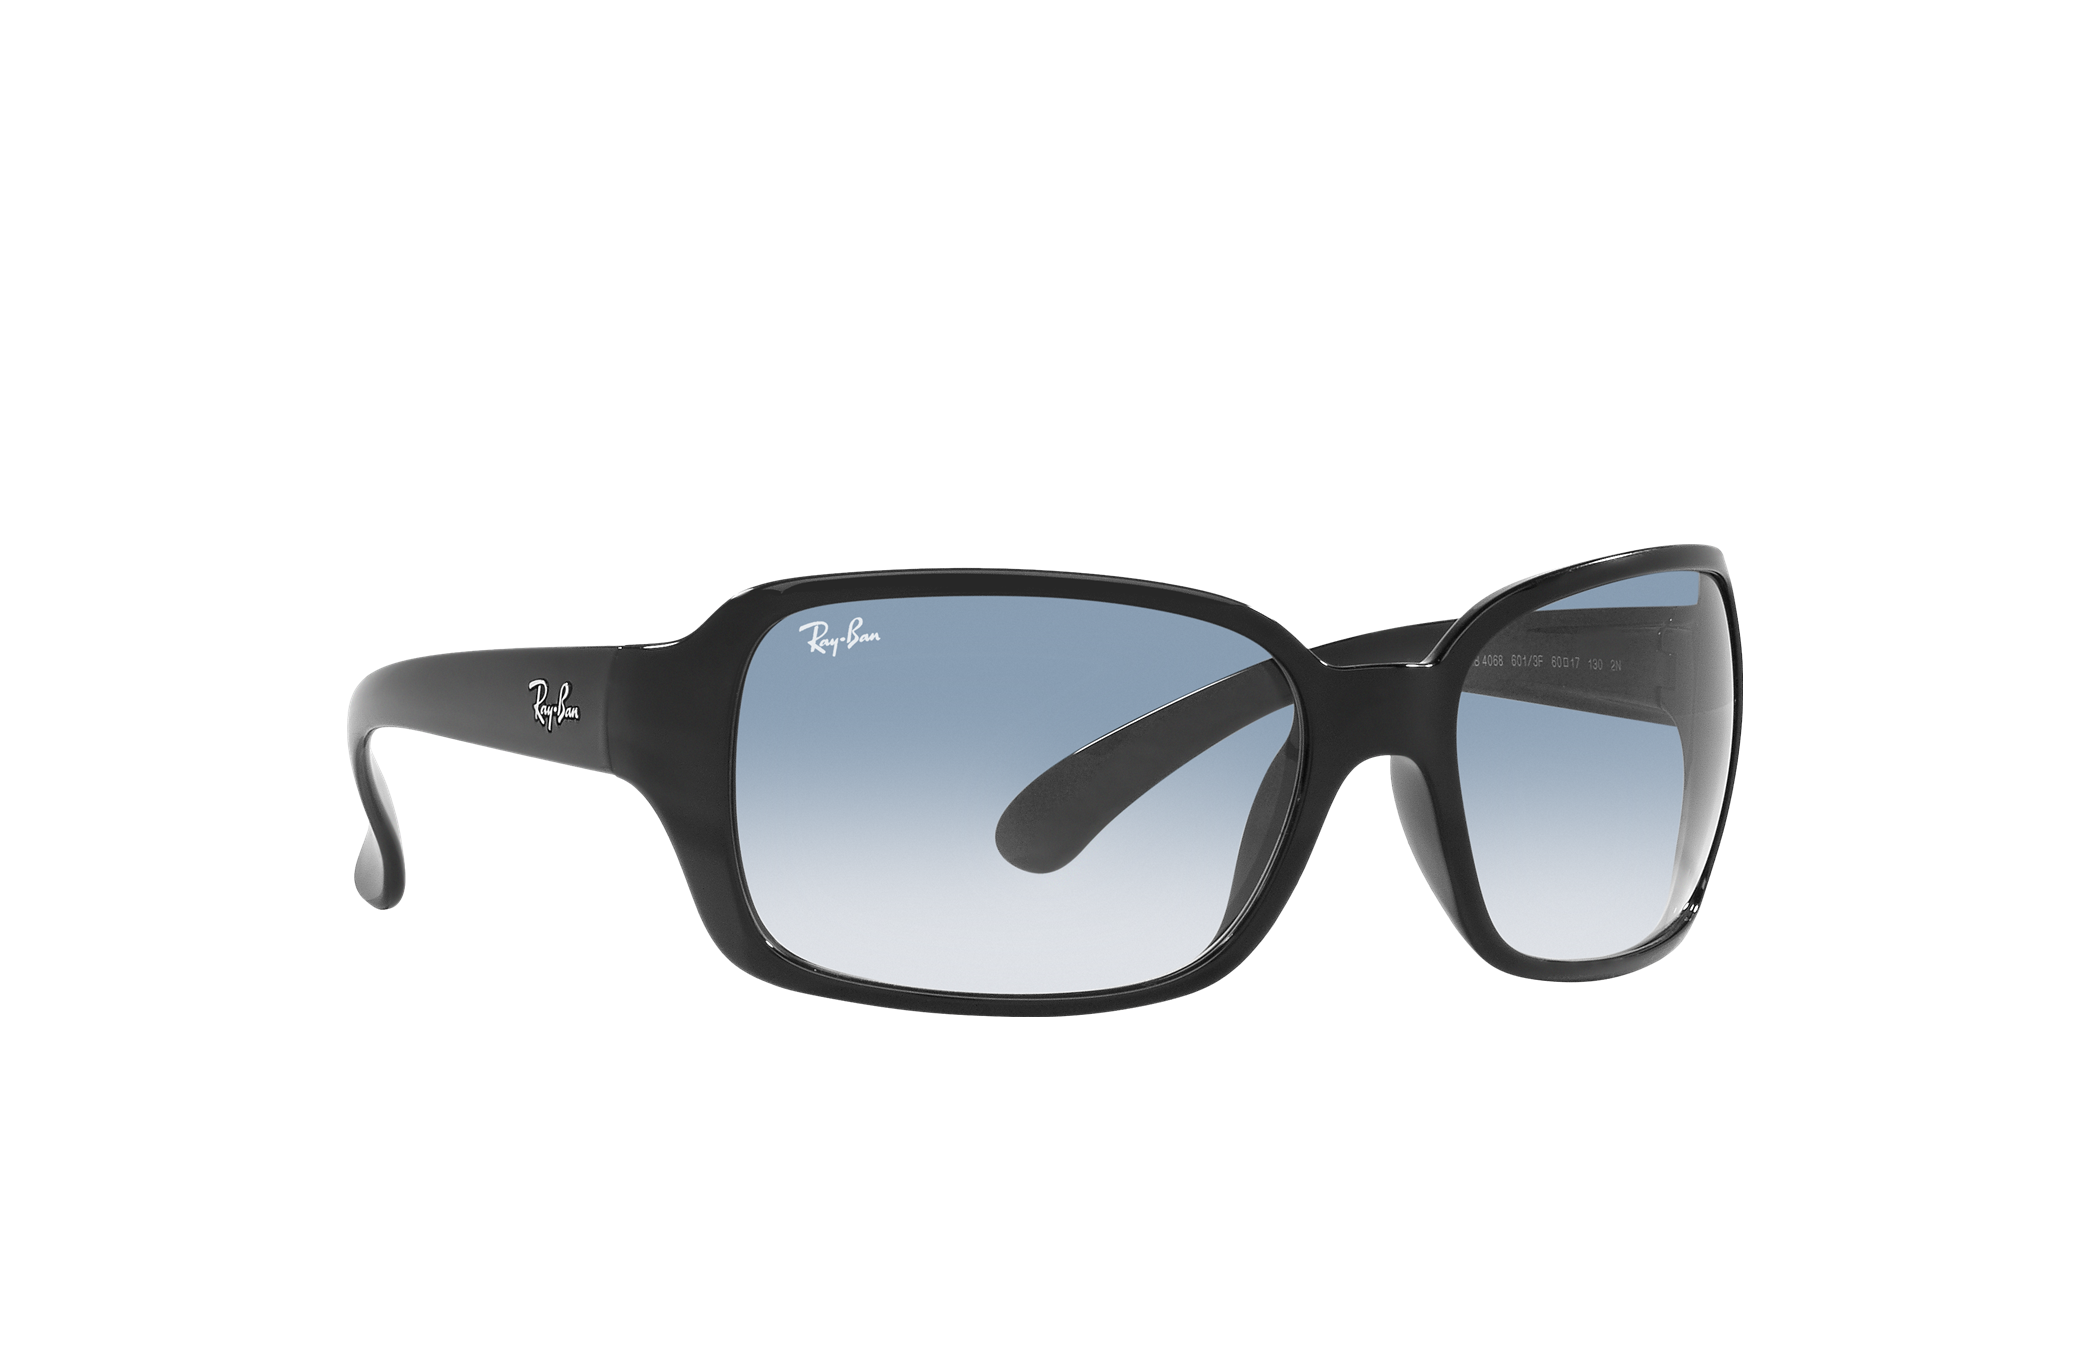 Ray-Ban RB4068 Sunglasses Female Fit Guide - YouTube